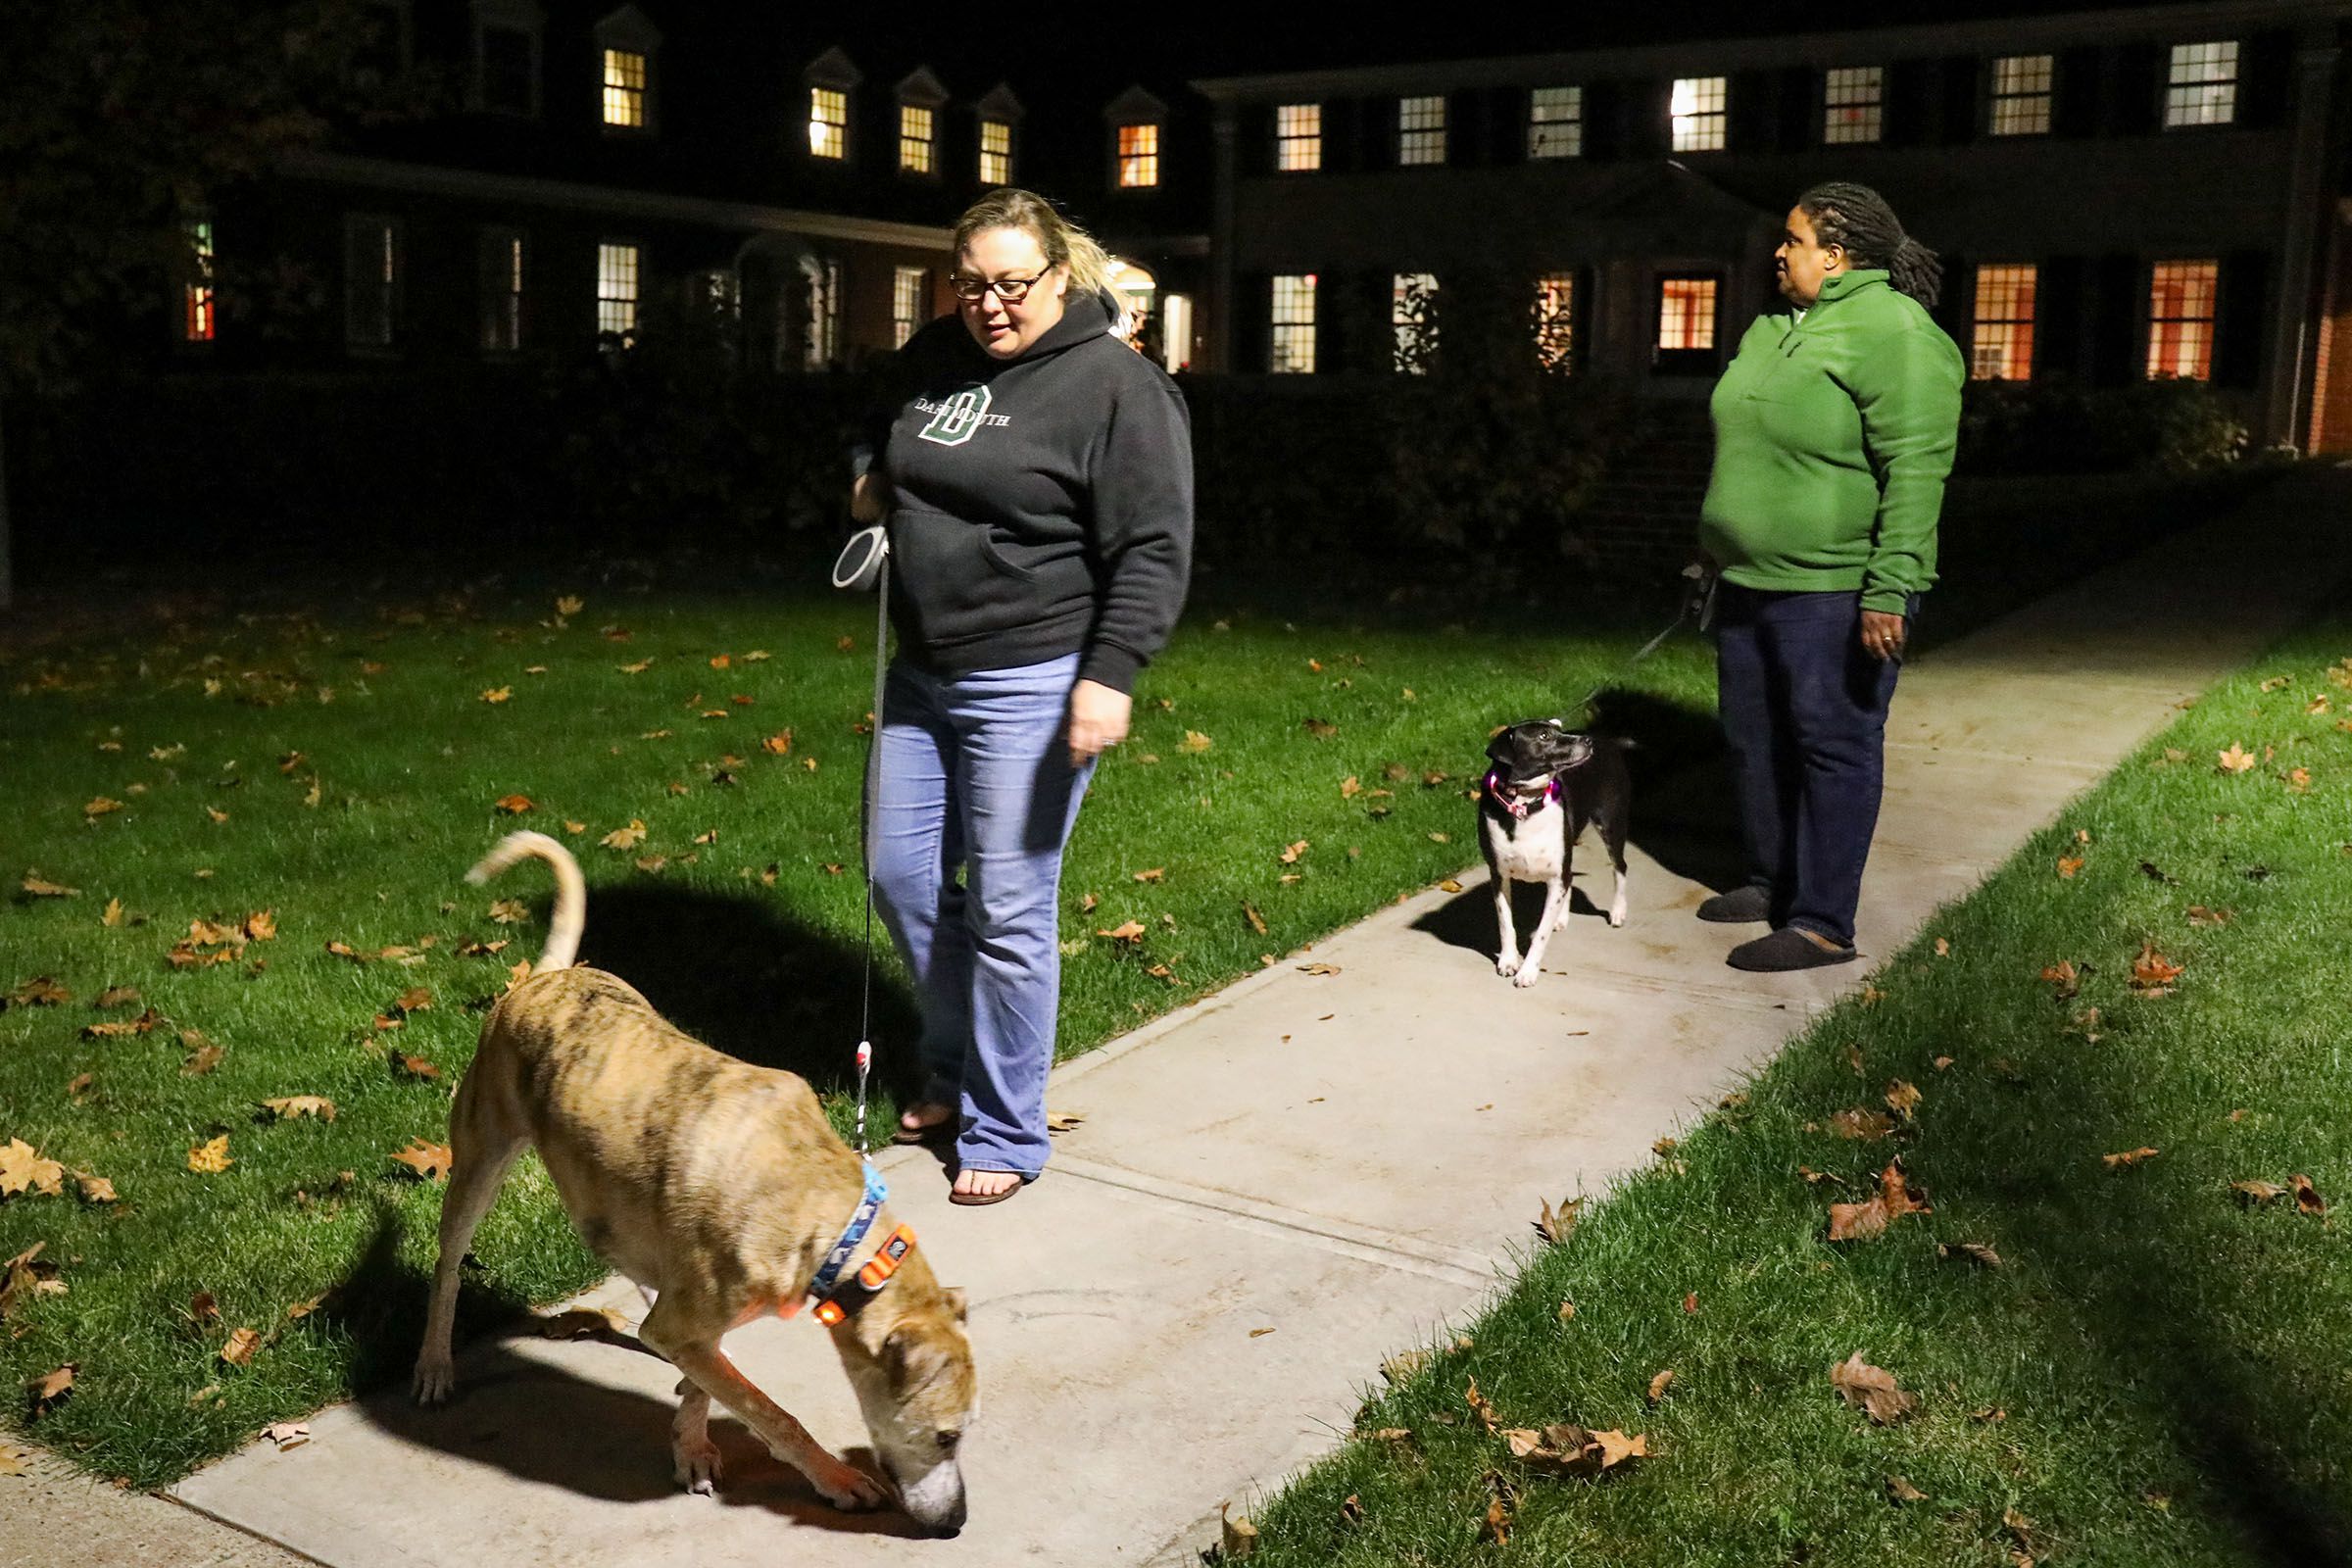 Jen Jones, left, of Hanover, N.H., walks with her wife, Dia Draper, also of Hanover, and their two dogs, Clay, left, and Sally on Monday, Oct. 23, 2017, outside of the Triangle House on the Dartmouth College campus in Hanover, N.H. The couple live at the Triangle House as live-in advisors for LGBTQIA+ students living on campus. (Valley News - Charles Hatcher) Copyright Valley News. May not be reprinted or used online without permission. Send requests to permission@vnews.com